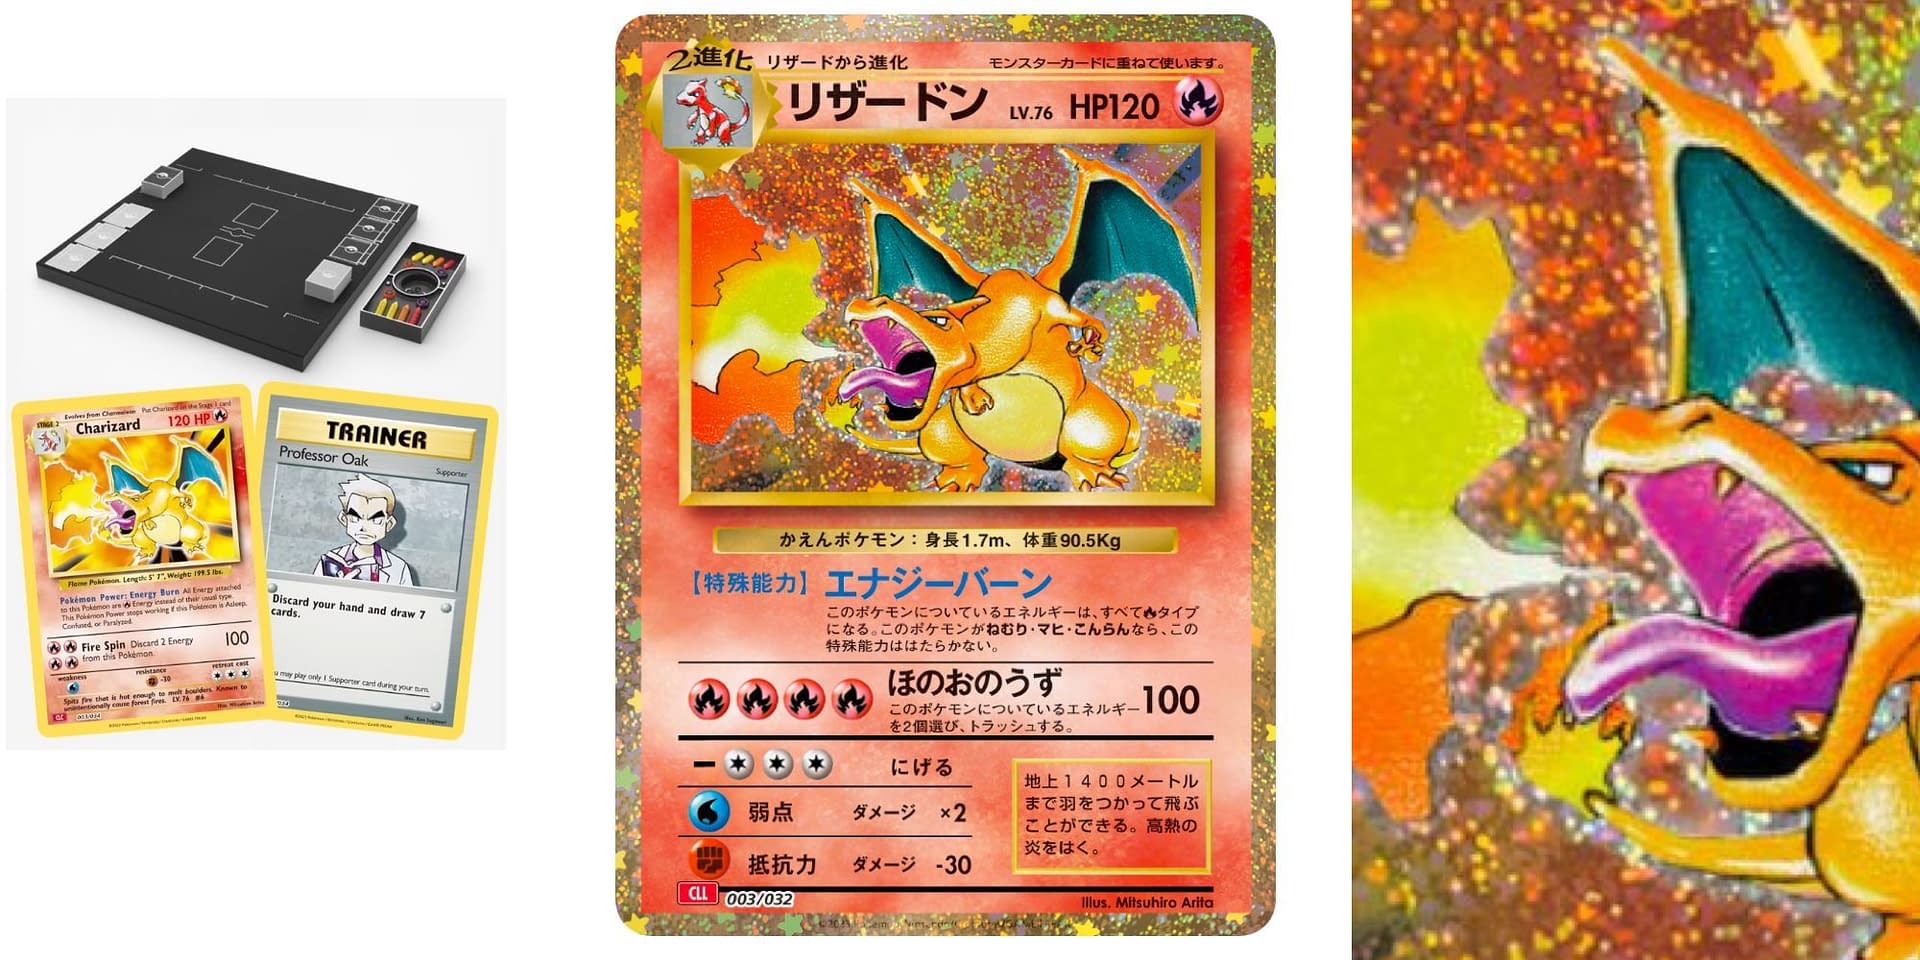 Can We Pull Charizard? Japanese Pokemon Celebrations 25th